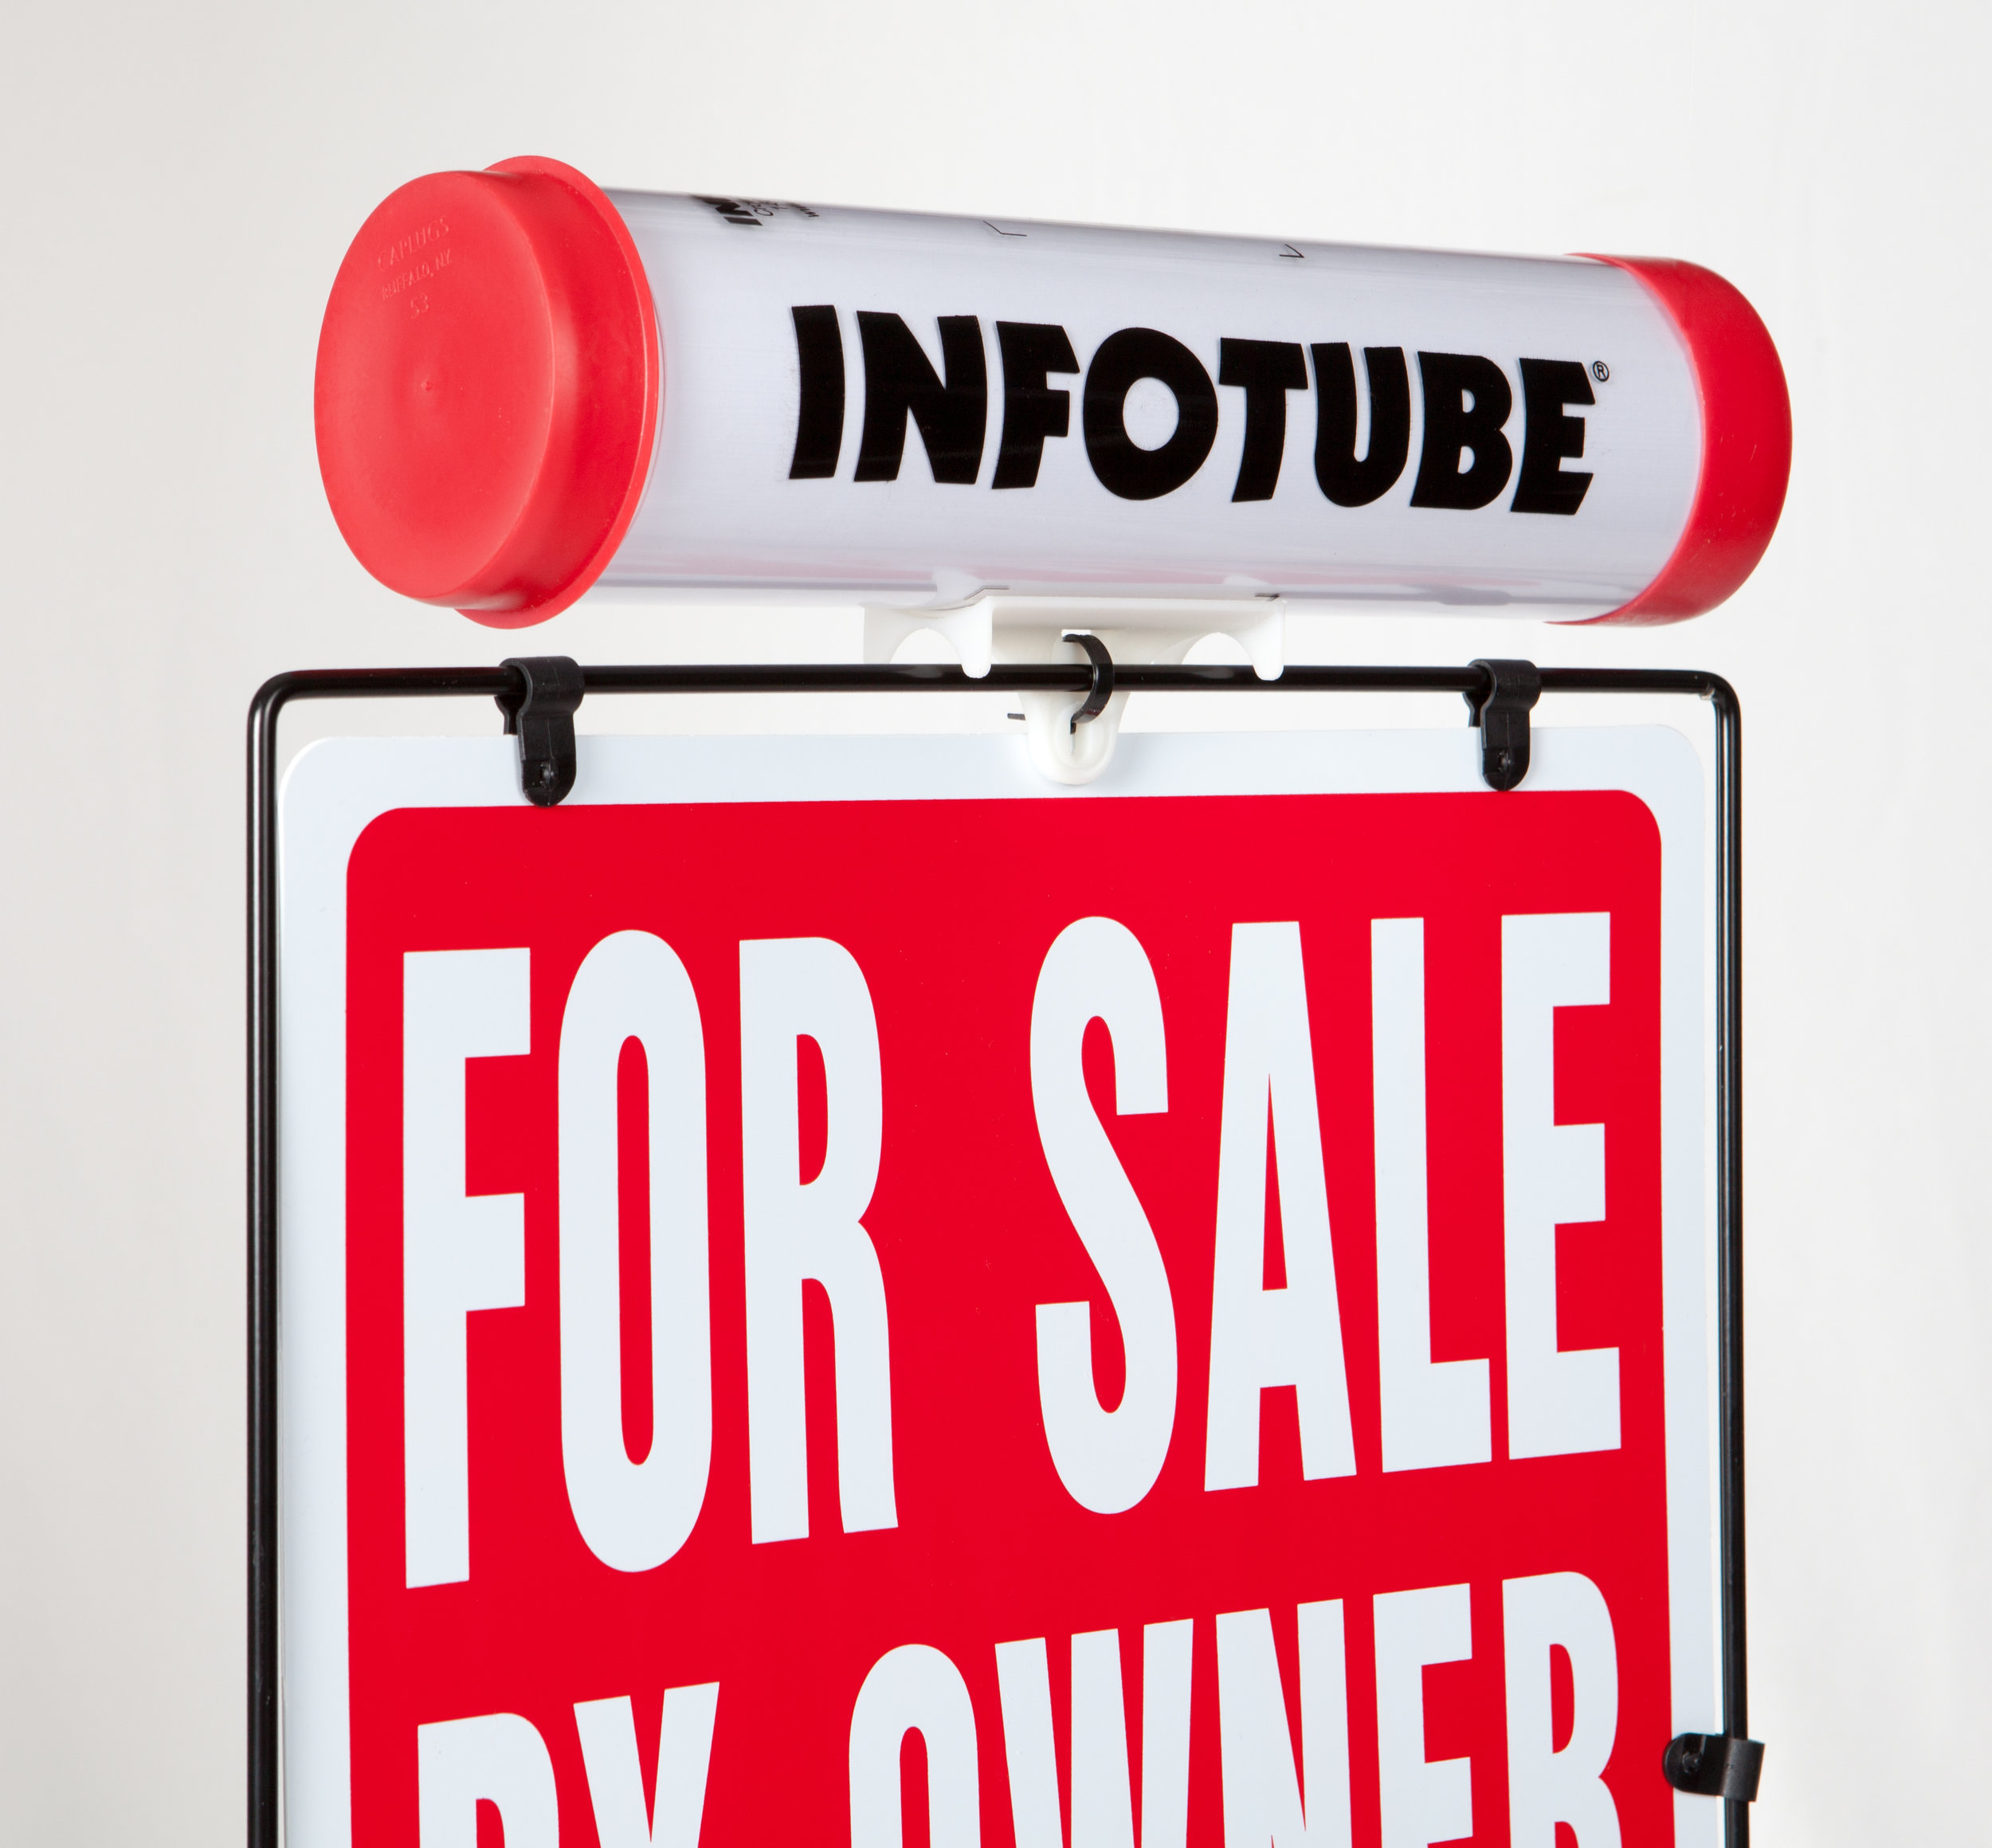 The InfoTube selling tool Details about   4 